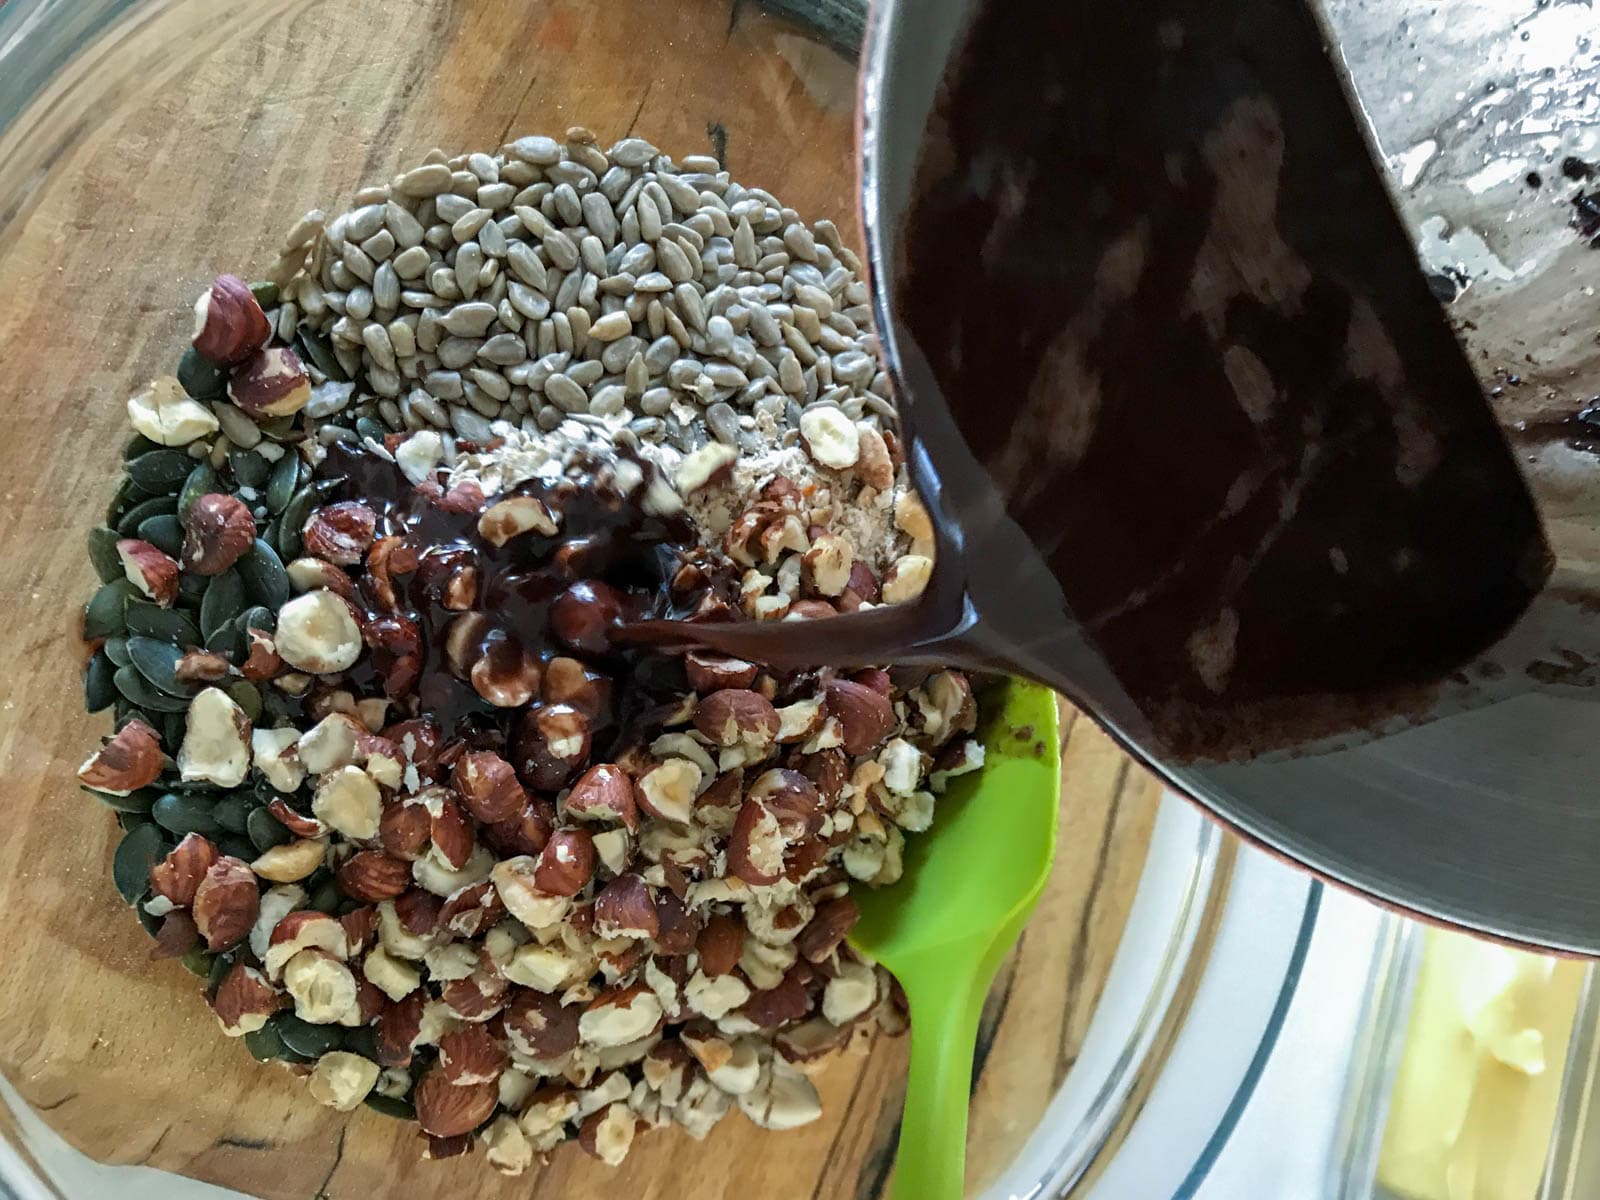 Pouring warm coconut oil, and chocolate over oats and nuts mixture to make granola.